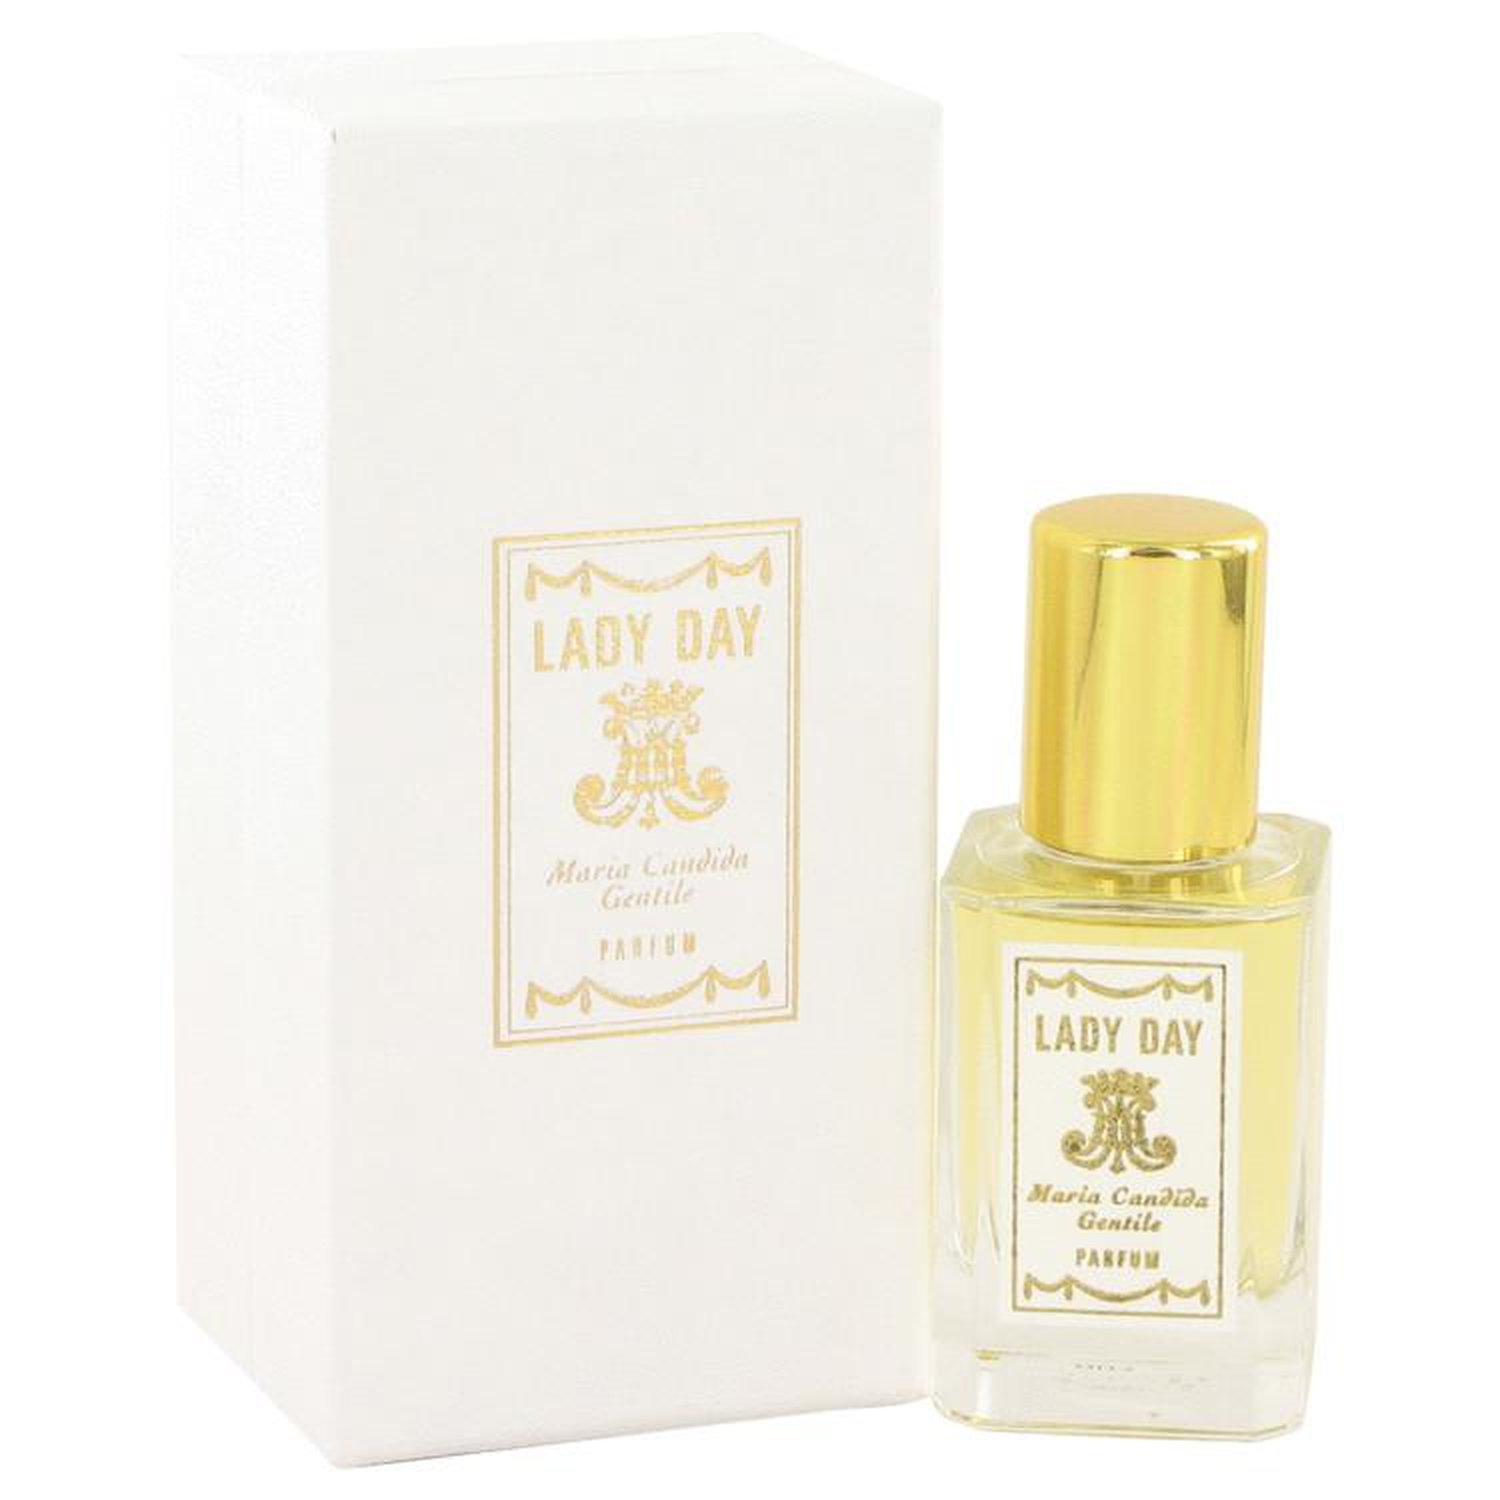 Lady Day by Maria Candida Gentile Pure Perfume (Women) 1 oz